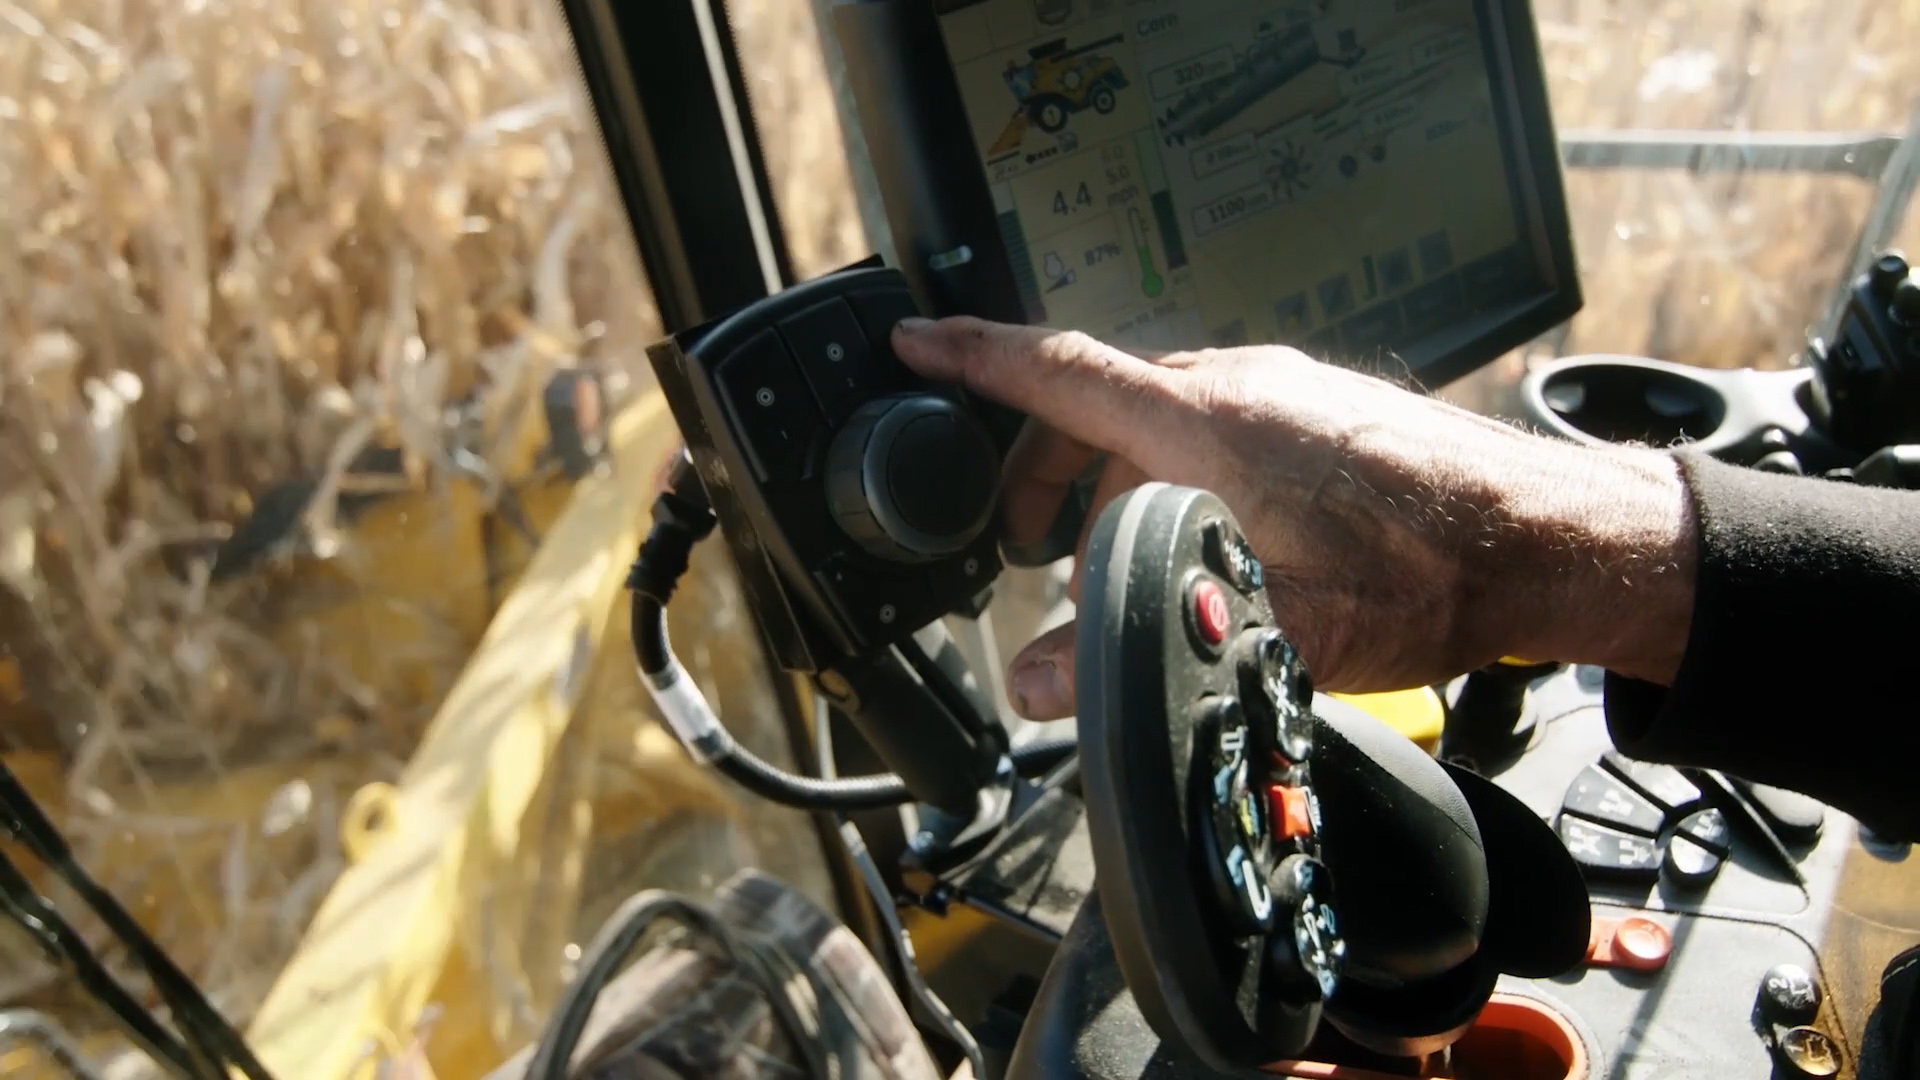 The Raven Autonomy™ Driver Assist Harvest Solution gives any grain cart driver — of any skill level — the tools to operate with confidence. The solution gives operators peace of mind with the push of a couple of buttons.